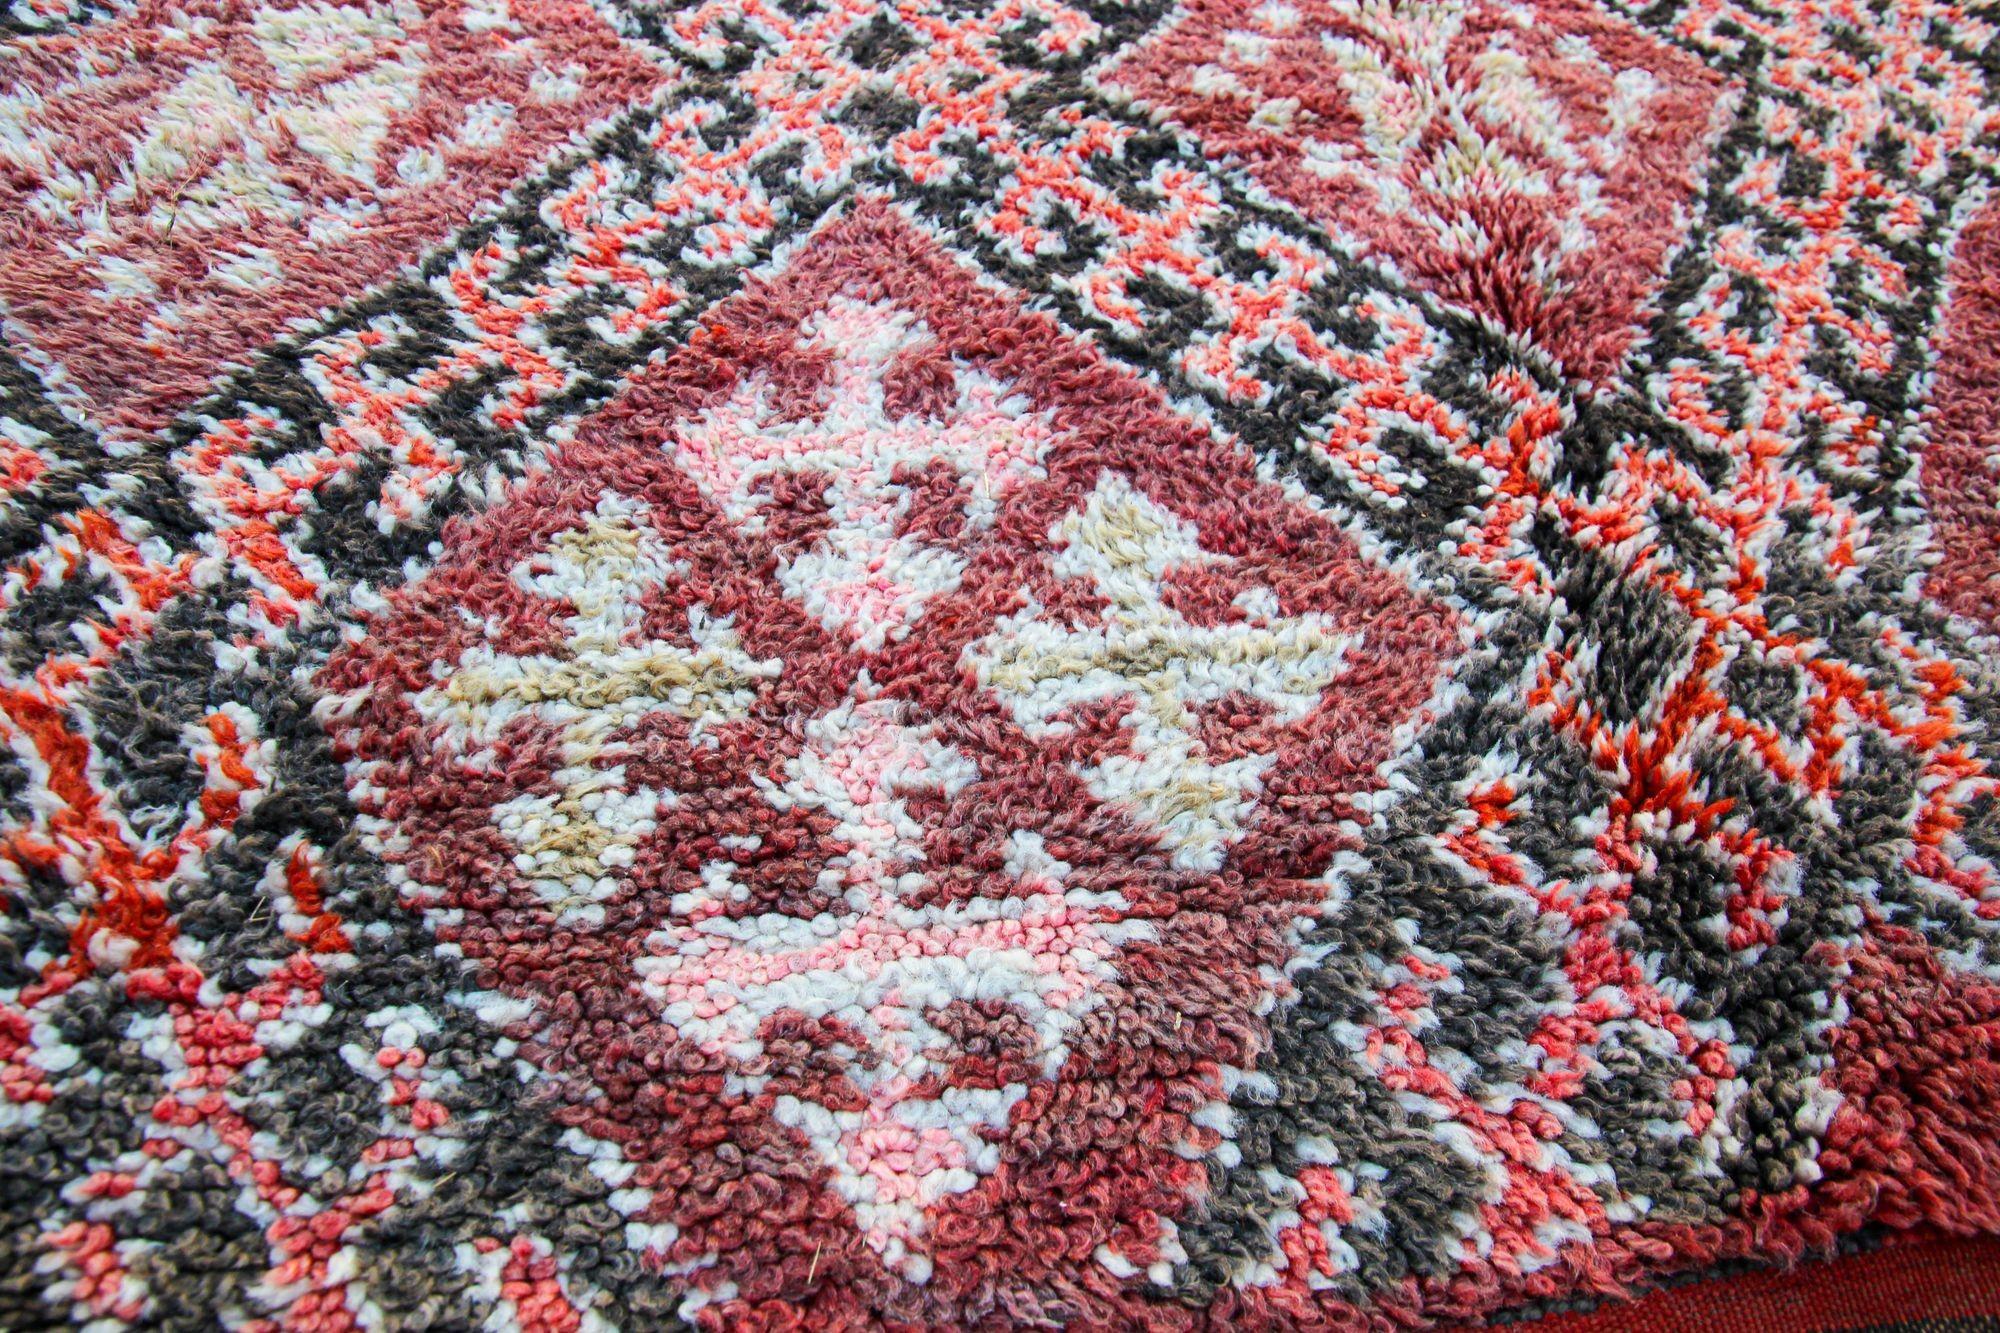 1960s Moroccan Berber Rug Pink Vintage Rehmana Marrakech Carpet In Good Condition For Sale In North Hollywood, CA